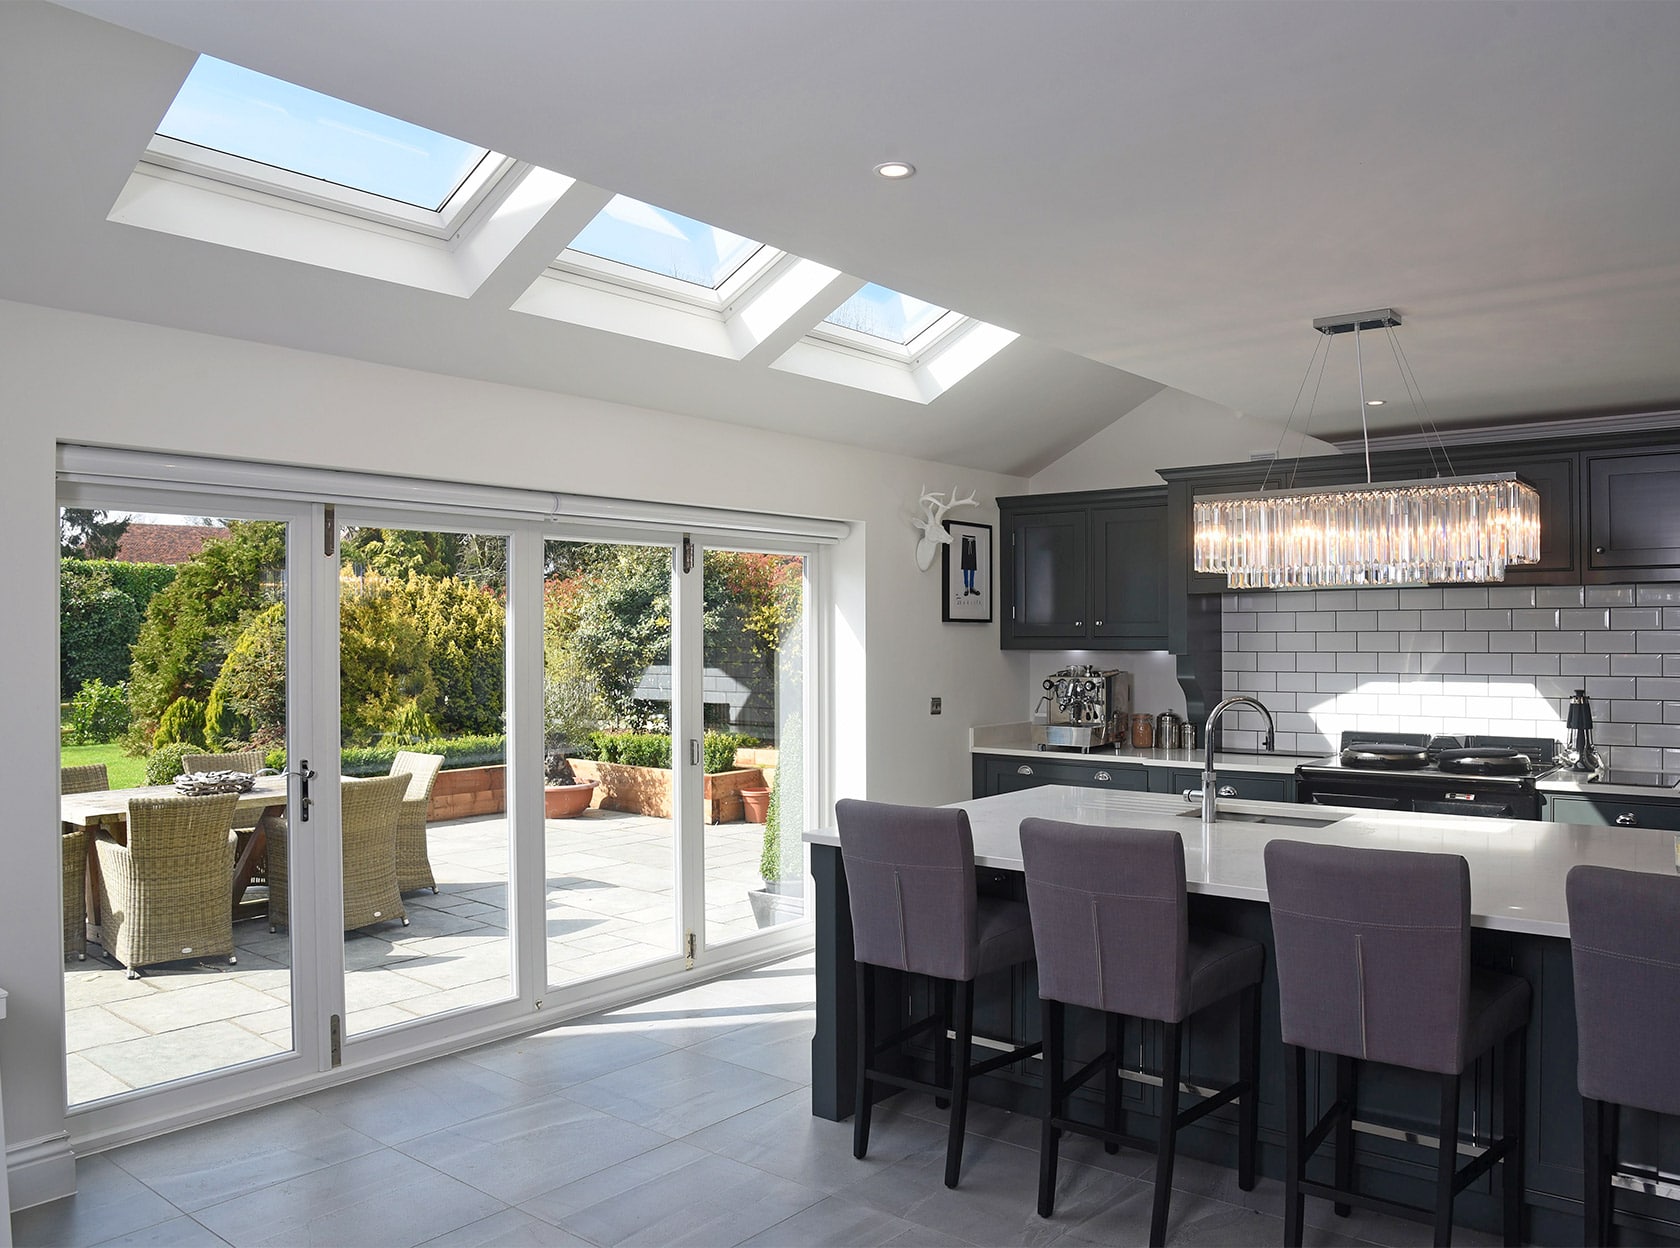 Timber Bifold Doors & Made To Measure Bifold Doors | Dale Joinery